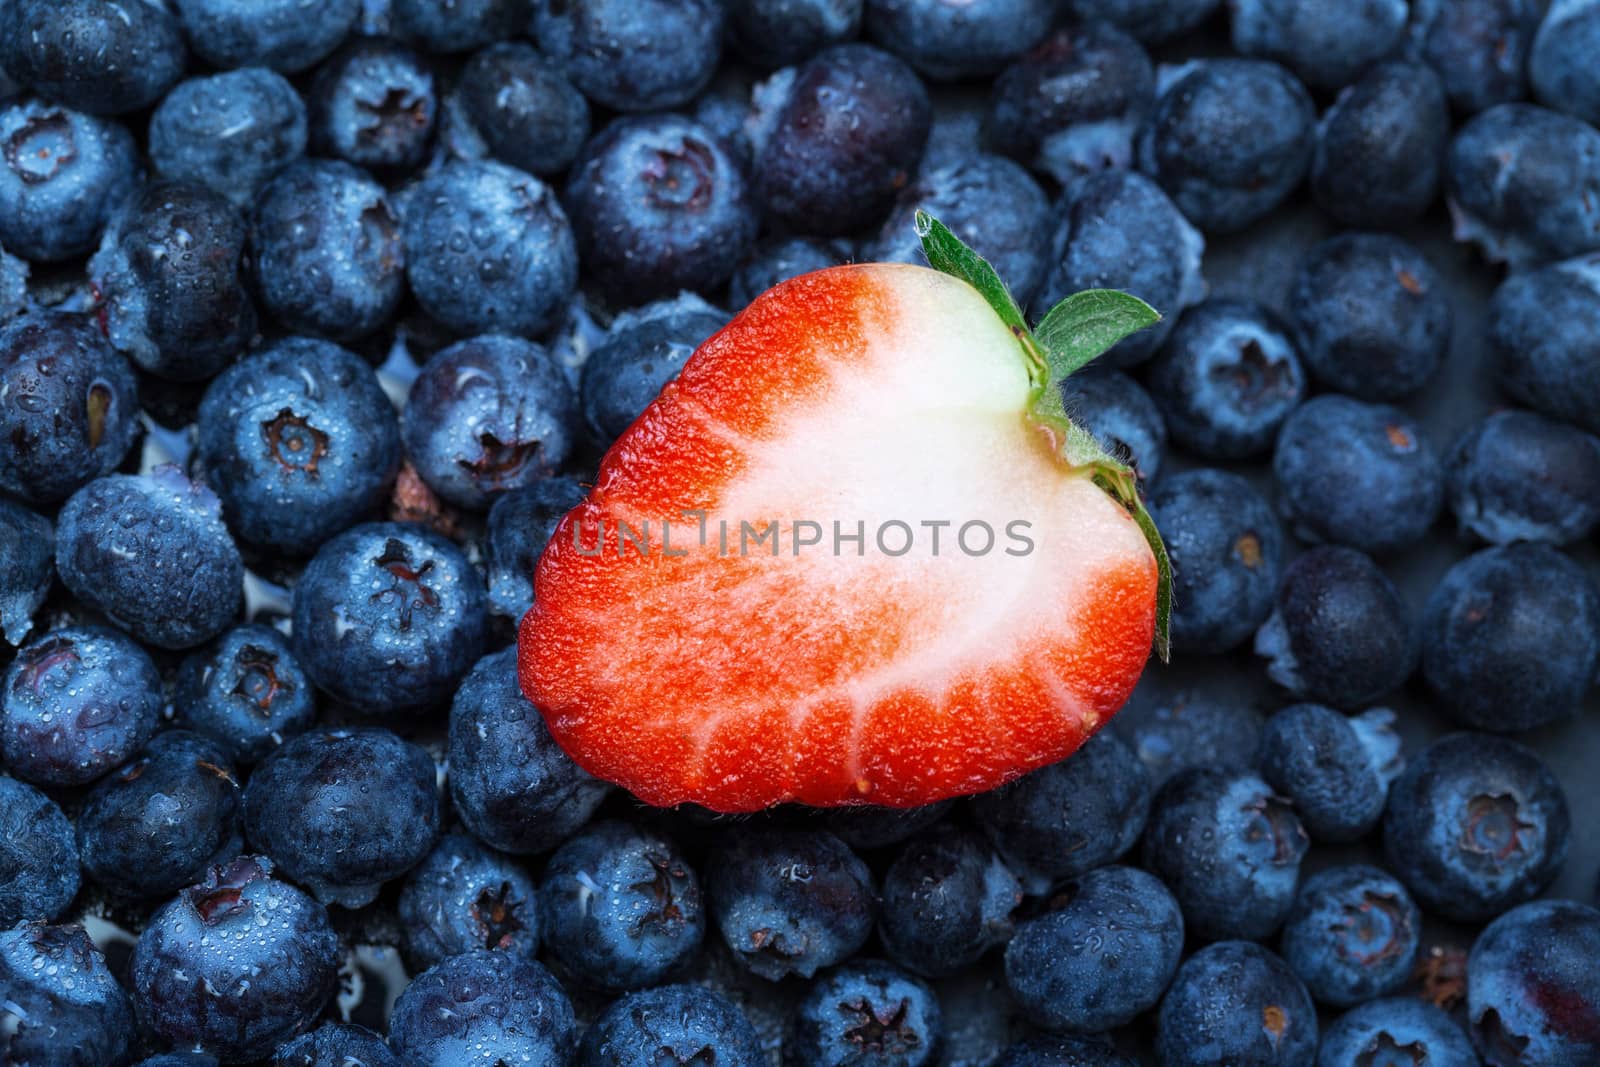 Freshly picked blueberries with strawberry by Discovod